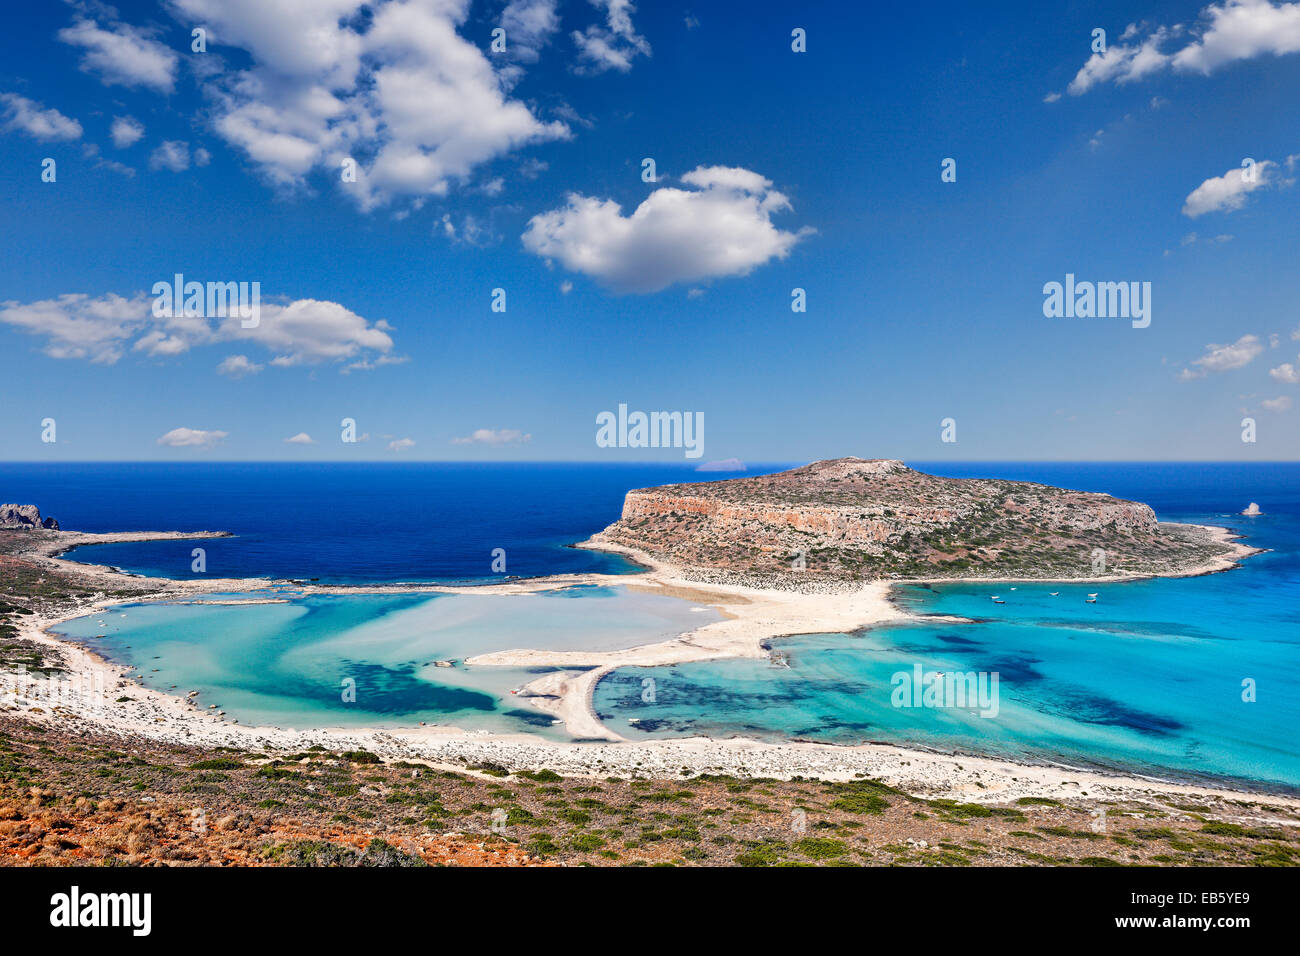 The unbelievable beauty of Balos Lagoon with Cap Tigani in Crete, Greece Stock Photo